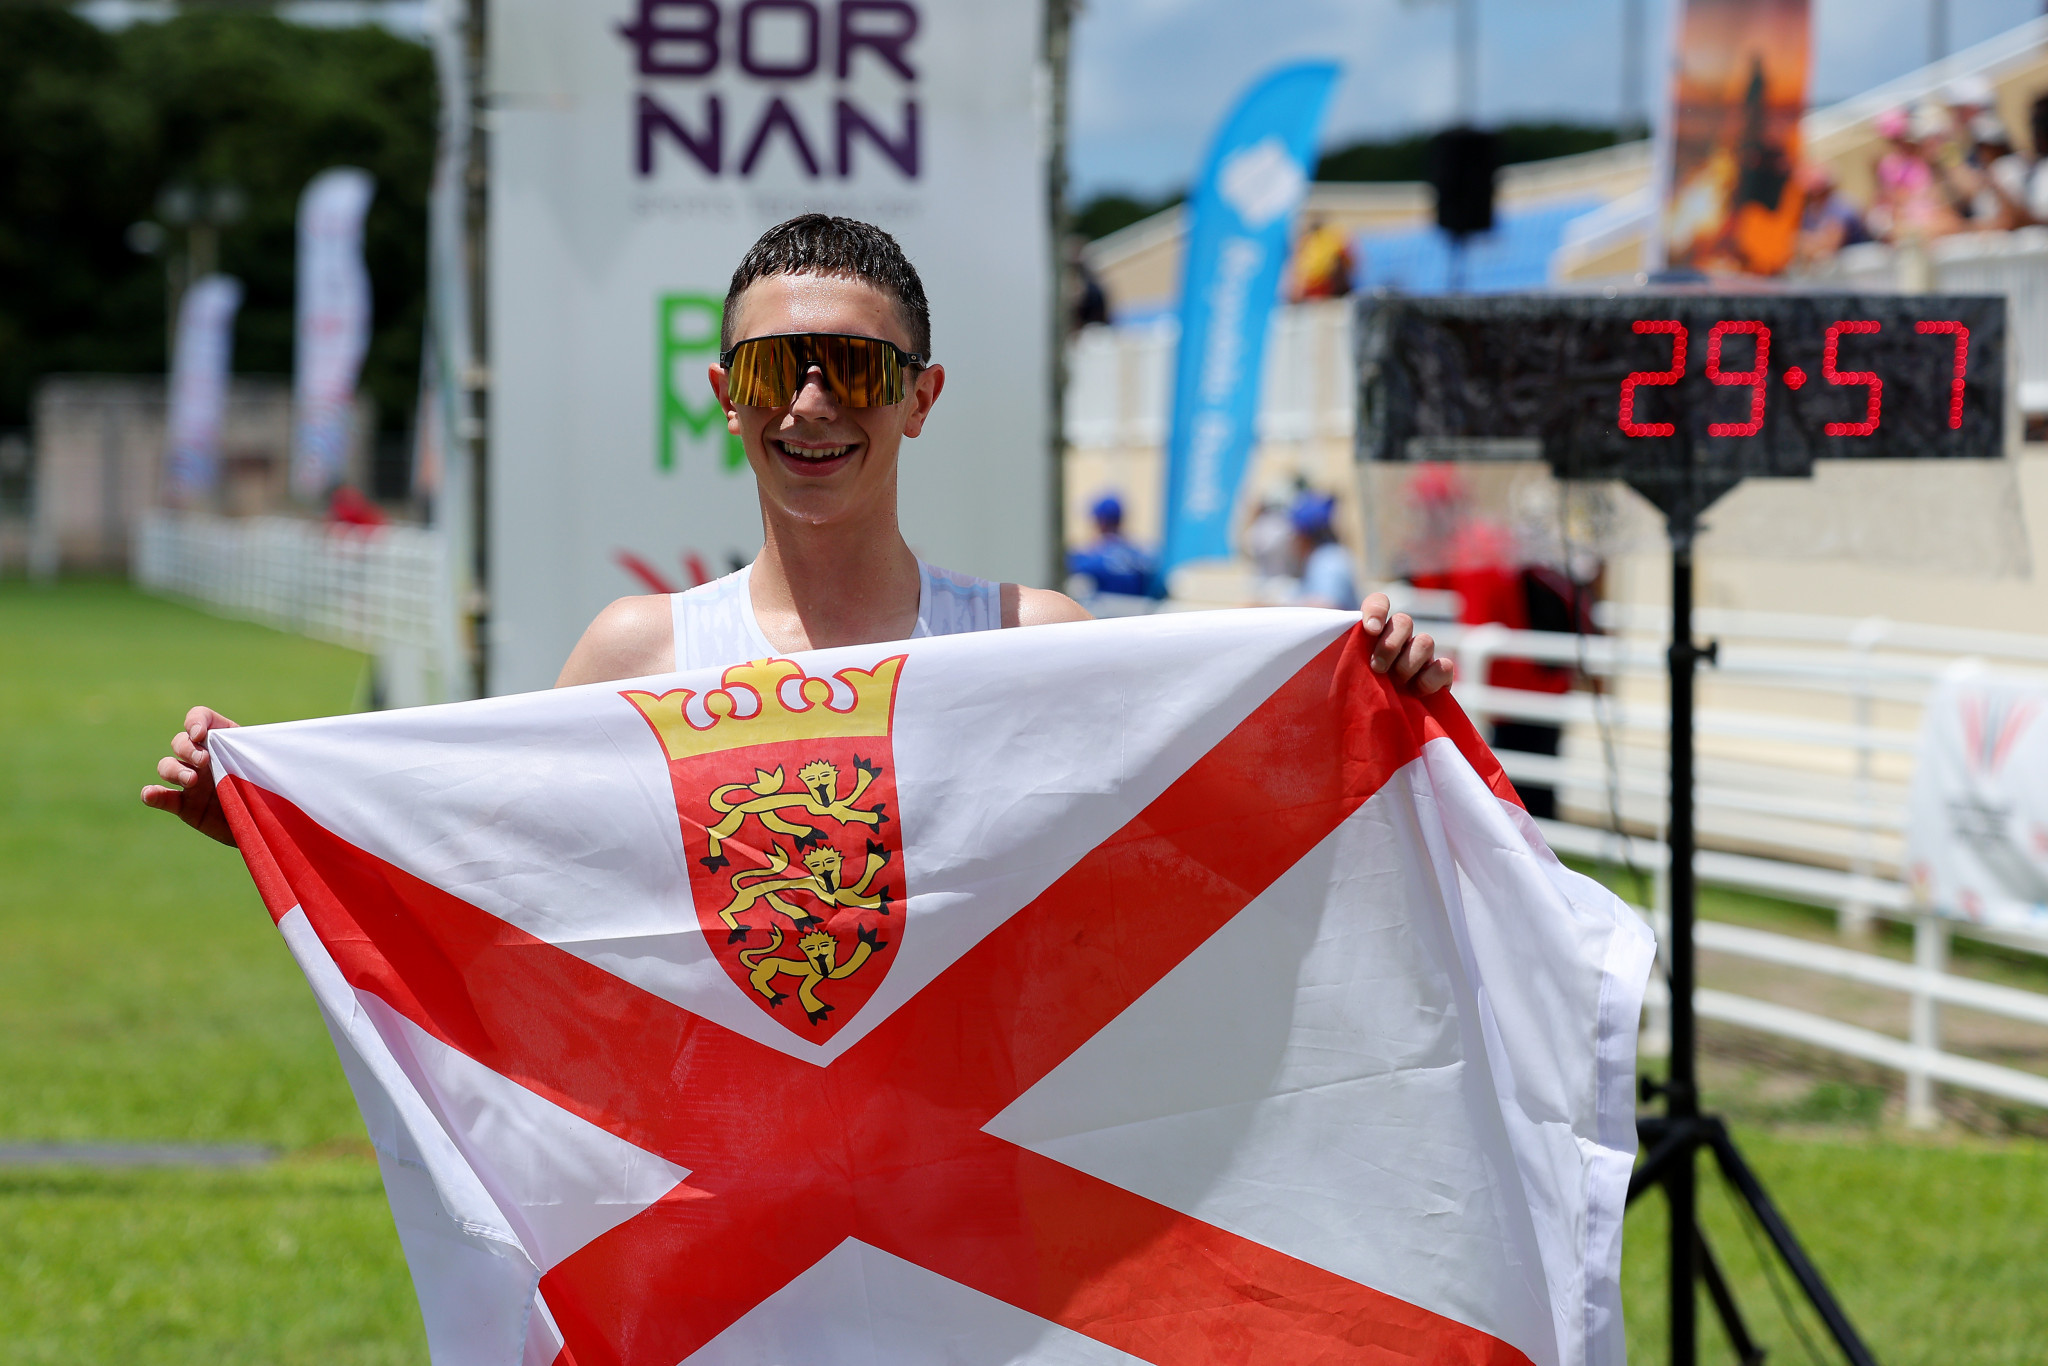 Luke Holmes triumphed for Jersey in the men's super sprint triathlon on day two at Trinbago 2023 ©Getty Images